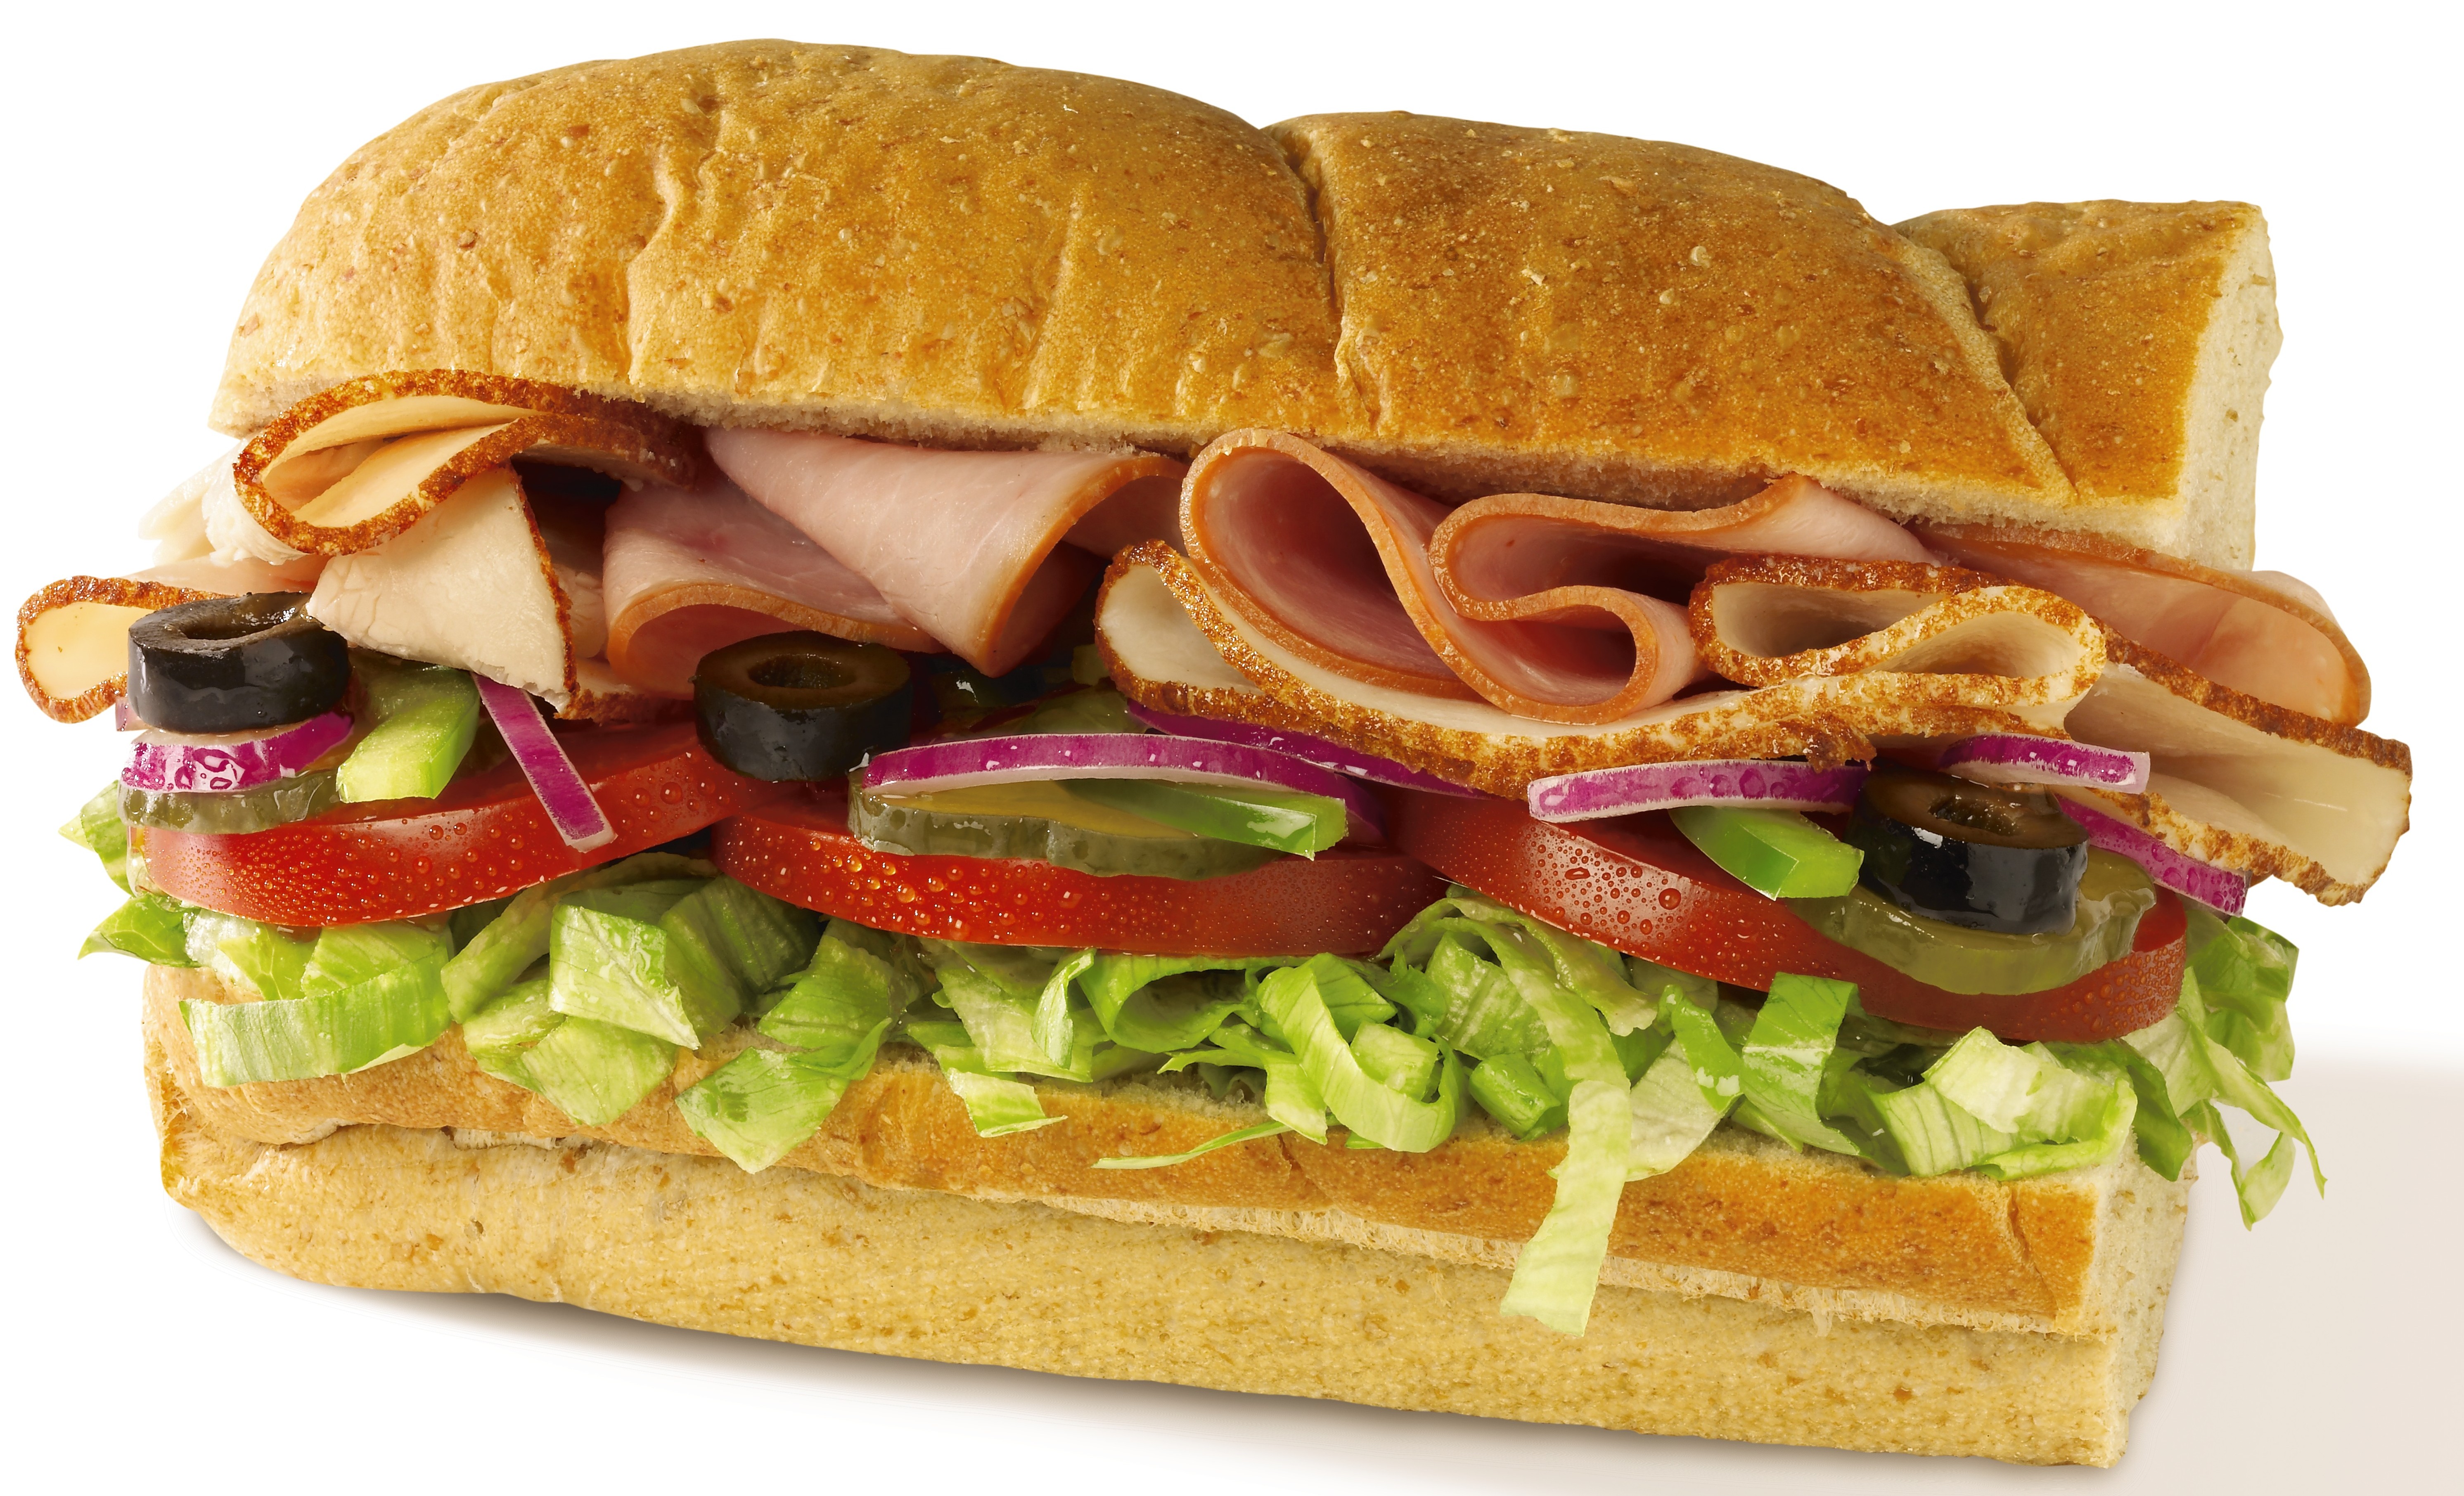 Fast Food Pictures - Portion Control Of Sandwich - HD Wallpaper 